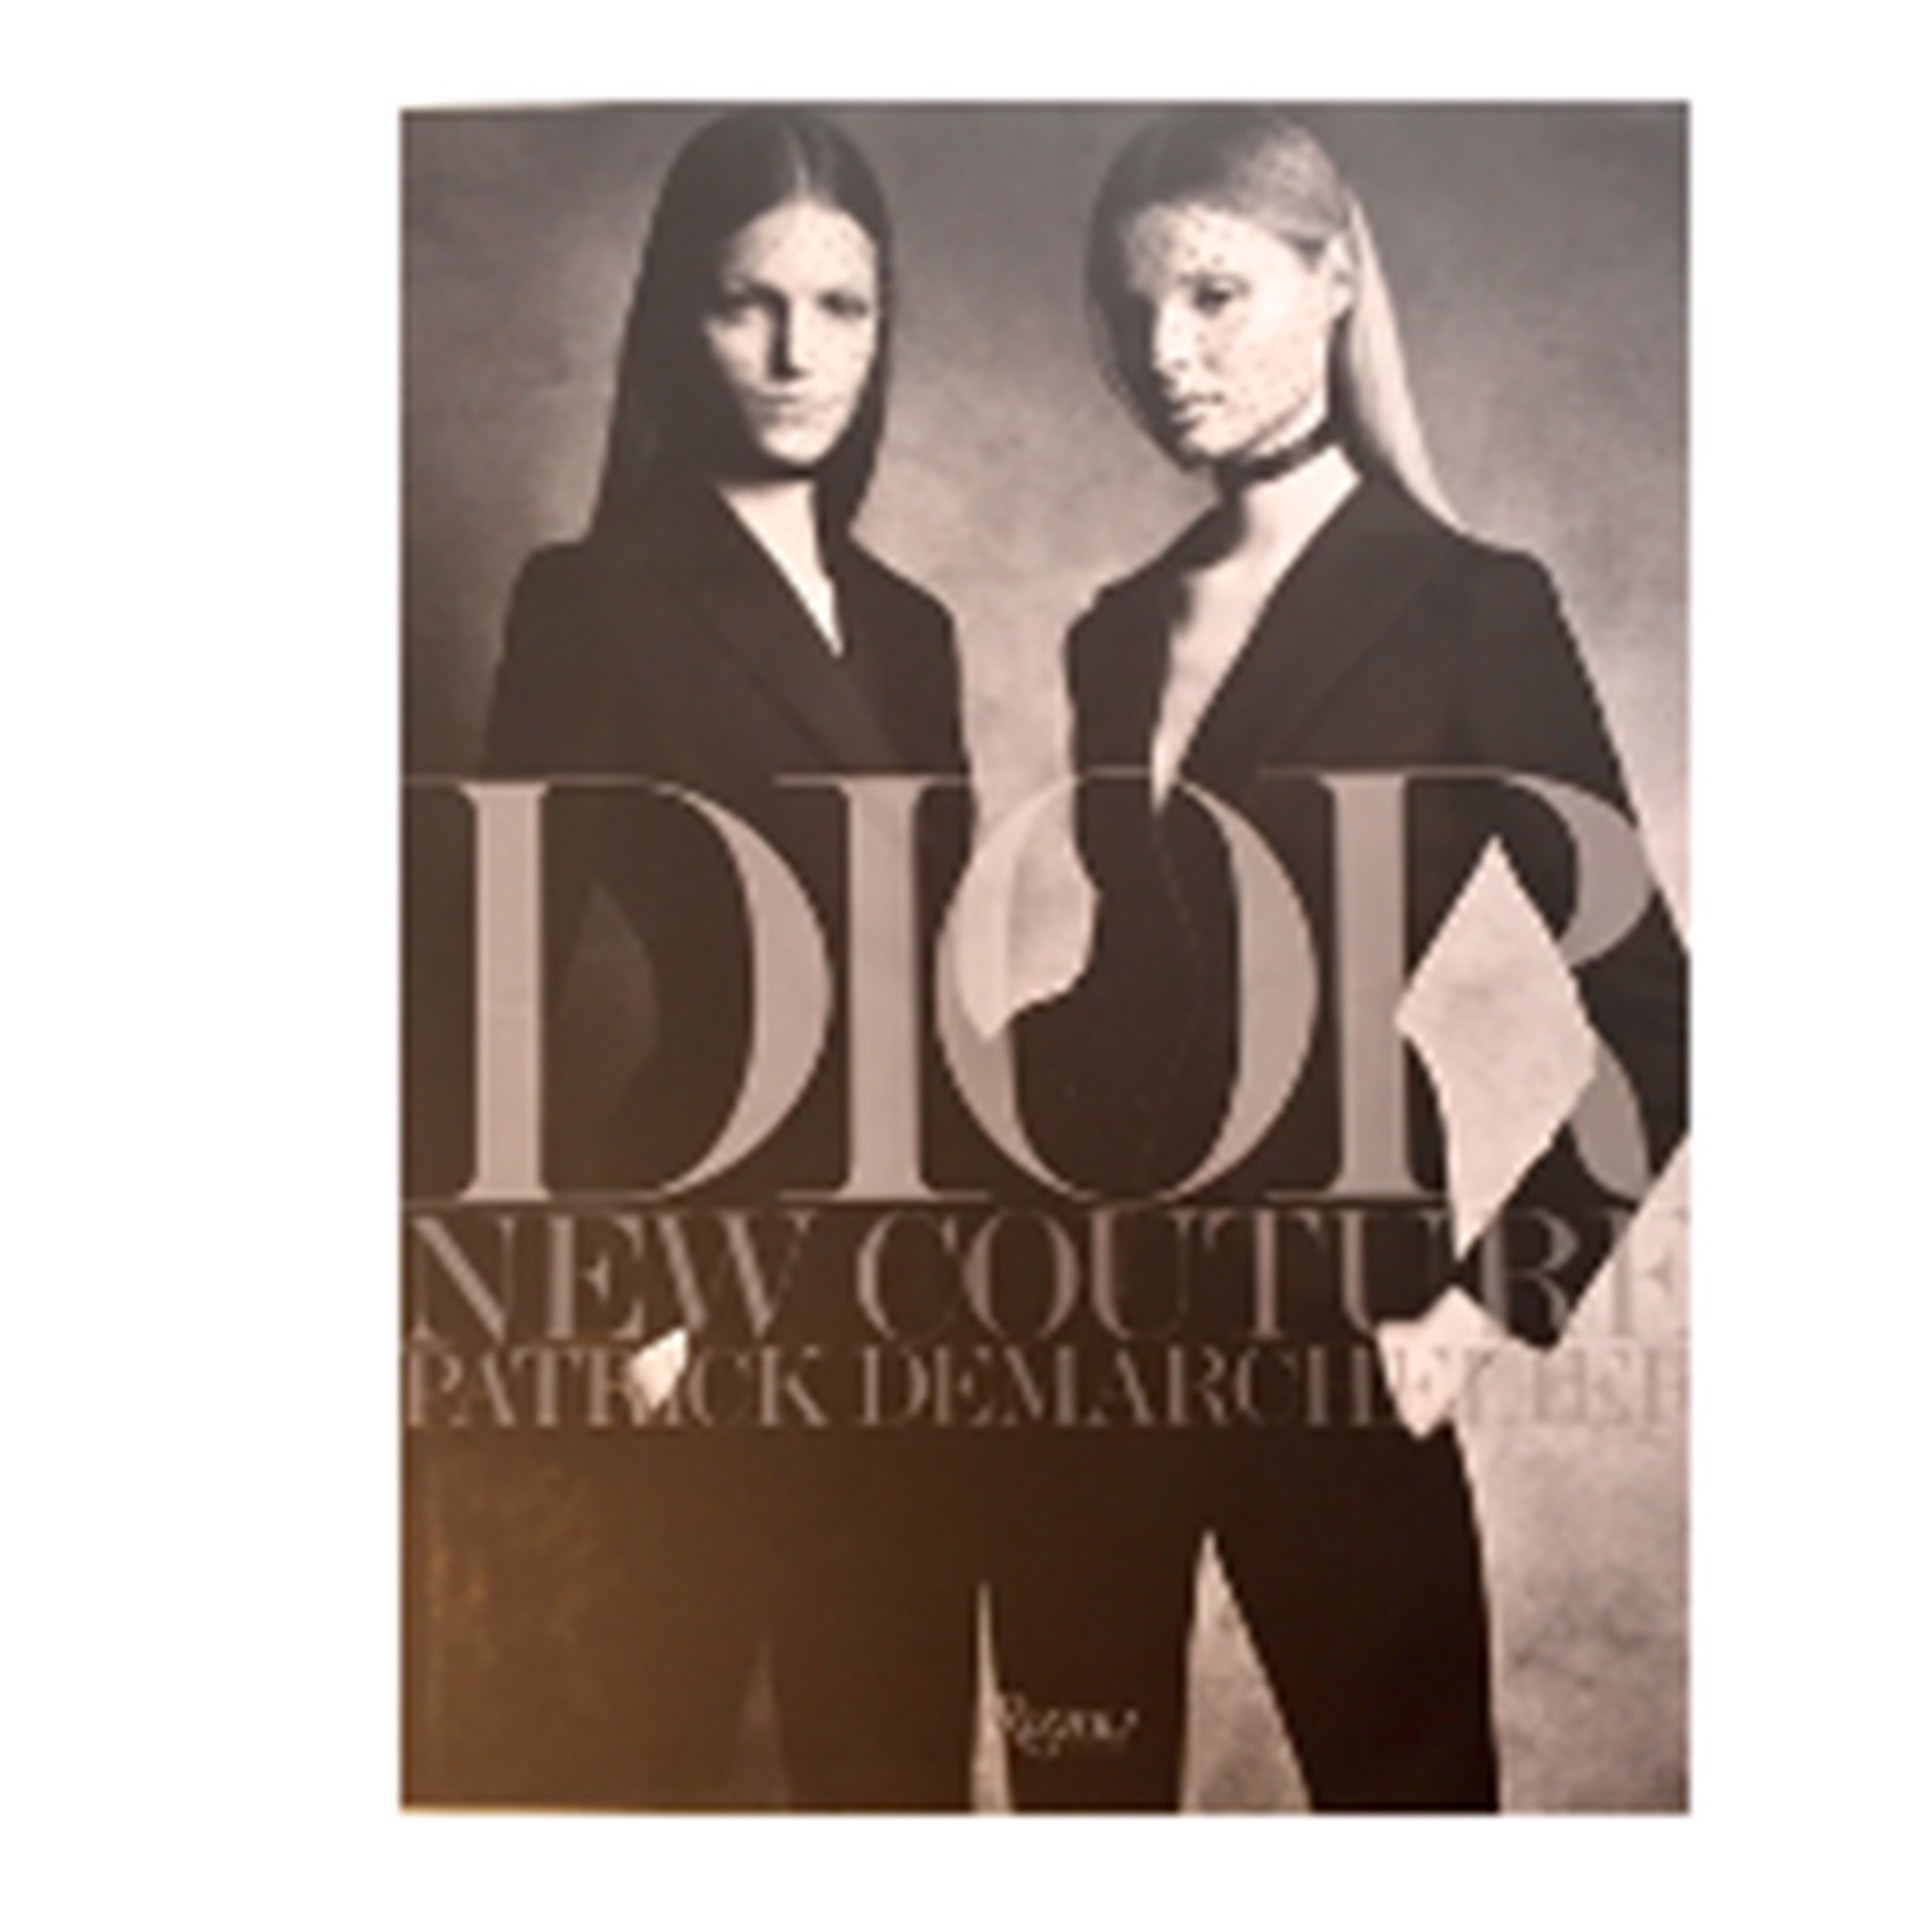 Dior New Couture